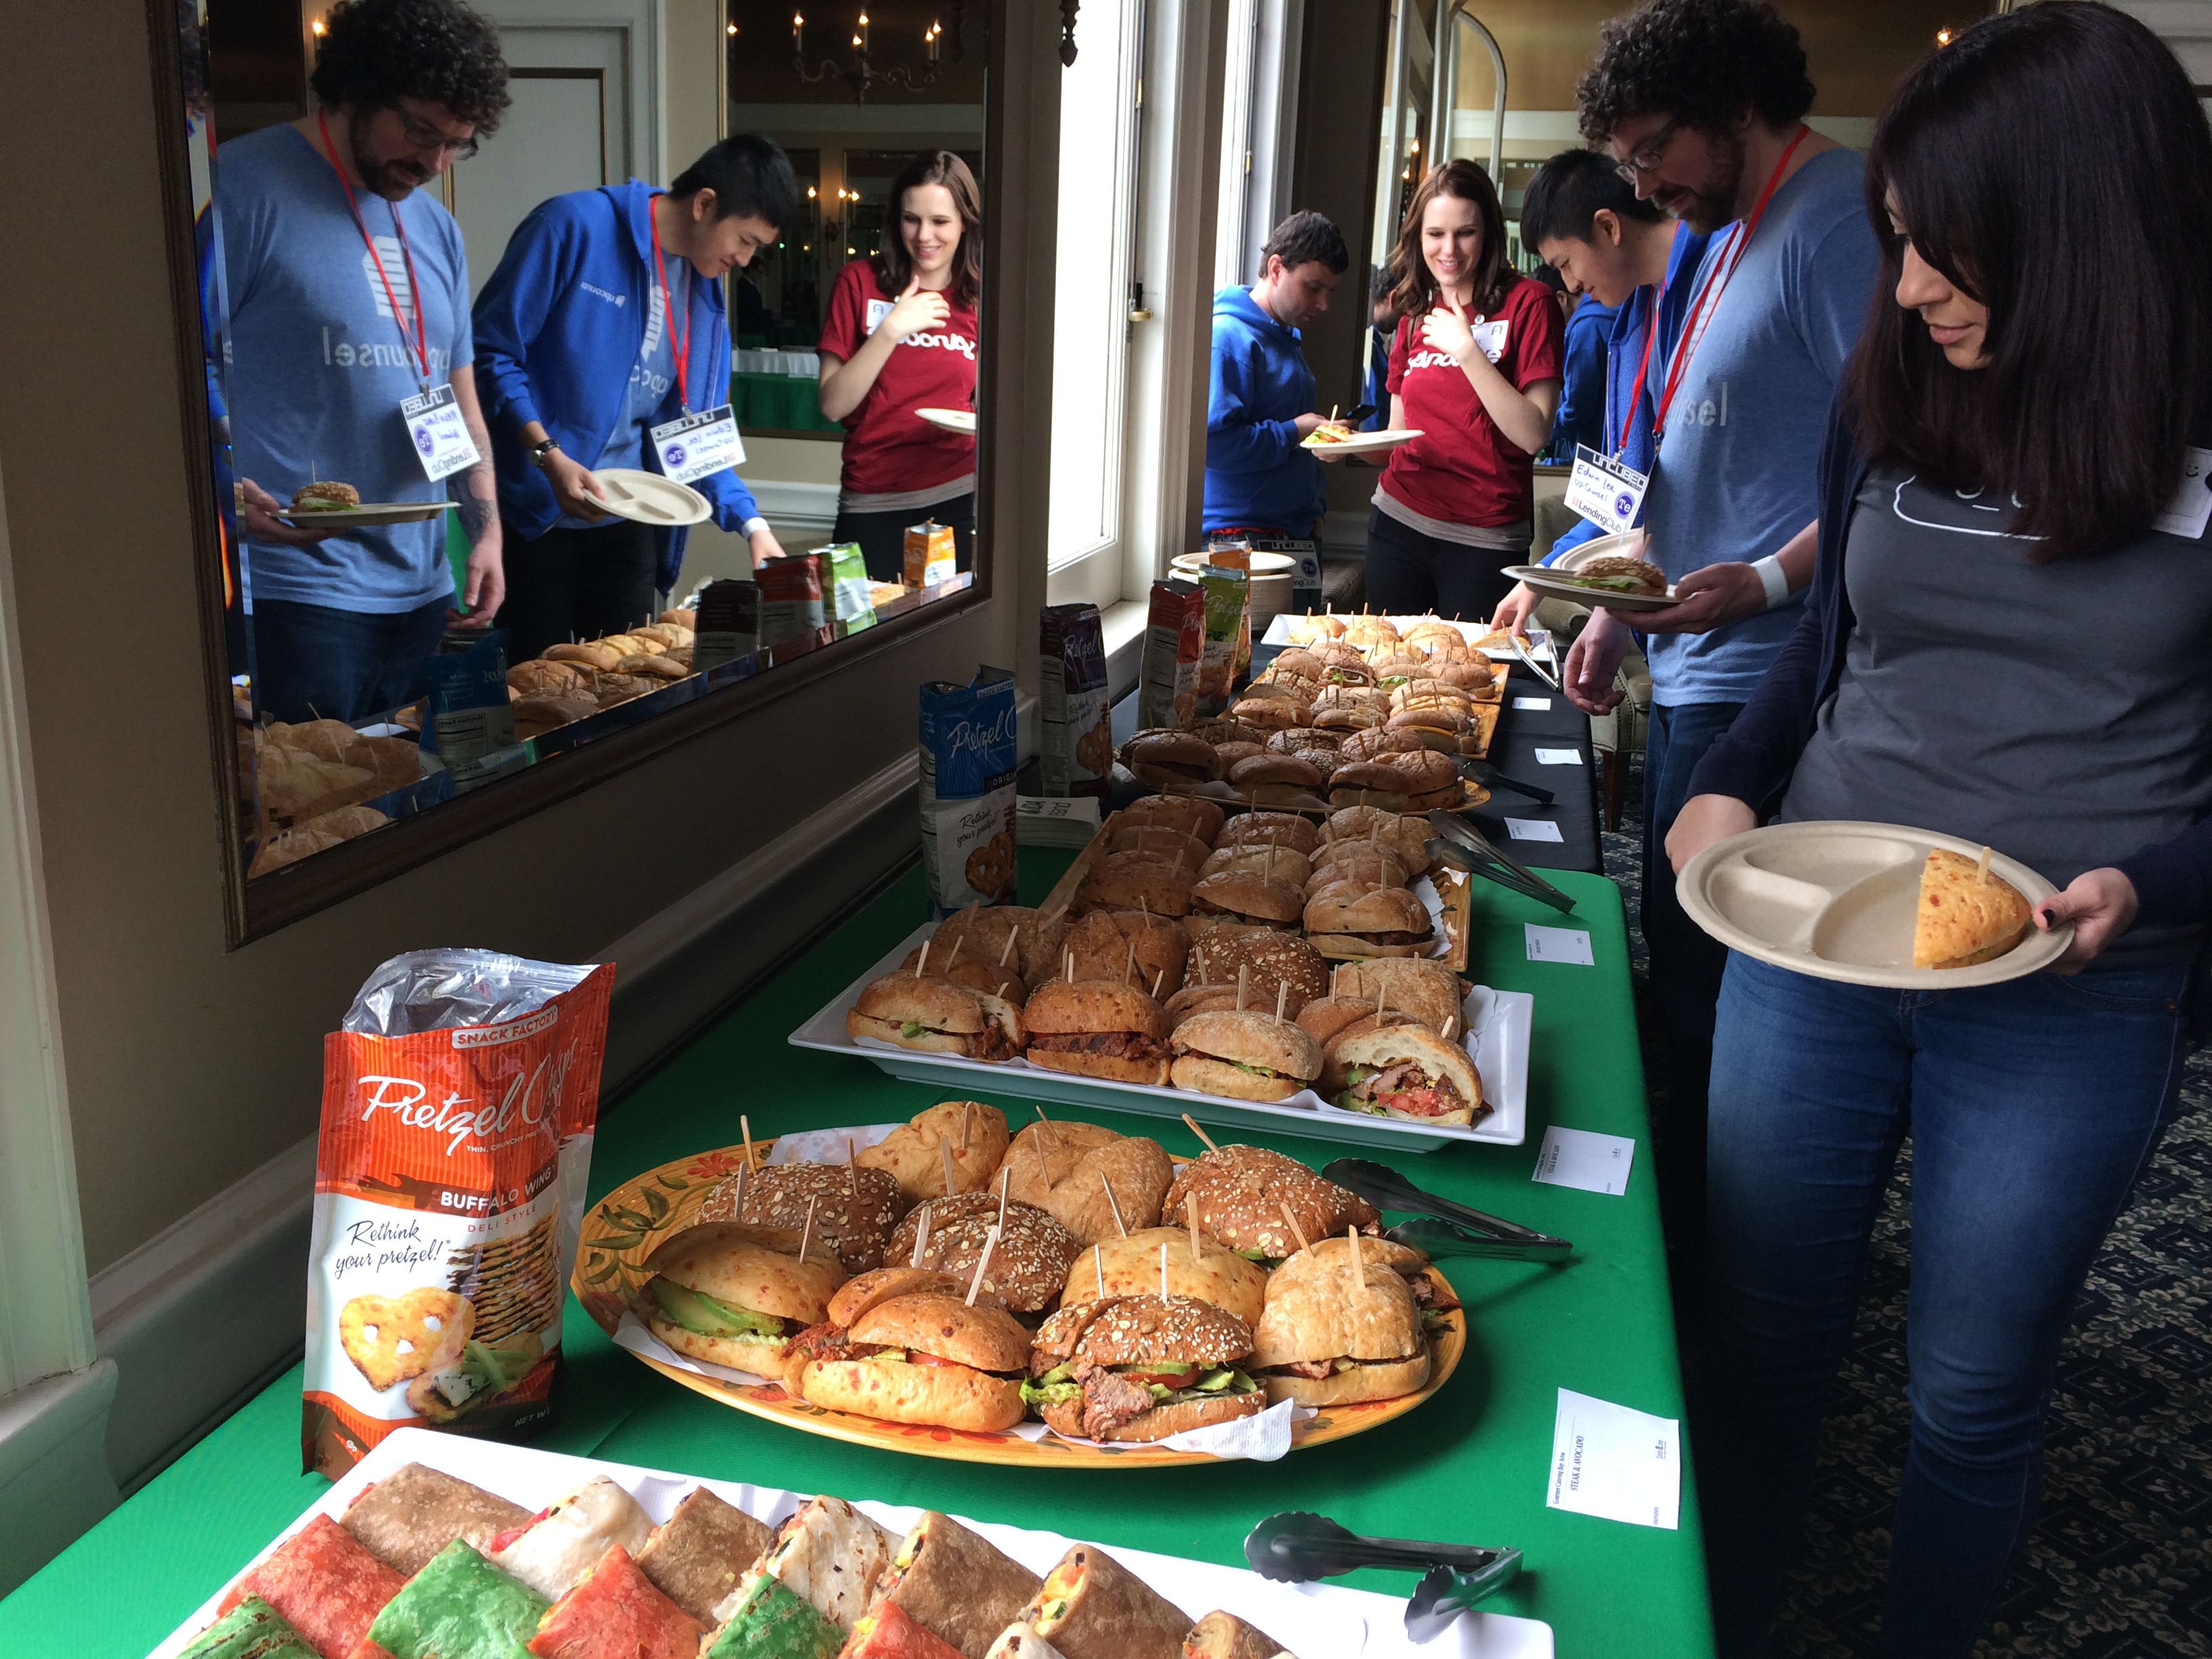 Workers choose from a selection of sandwiches provided by Cater2.me. (Photo via Cater2.me)